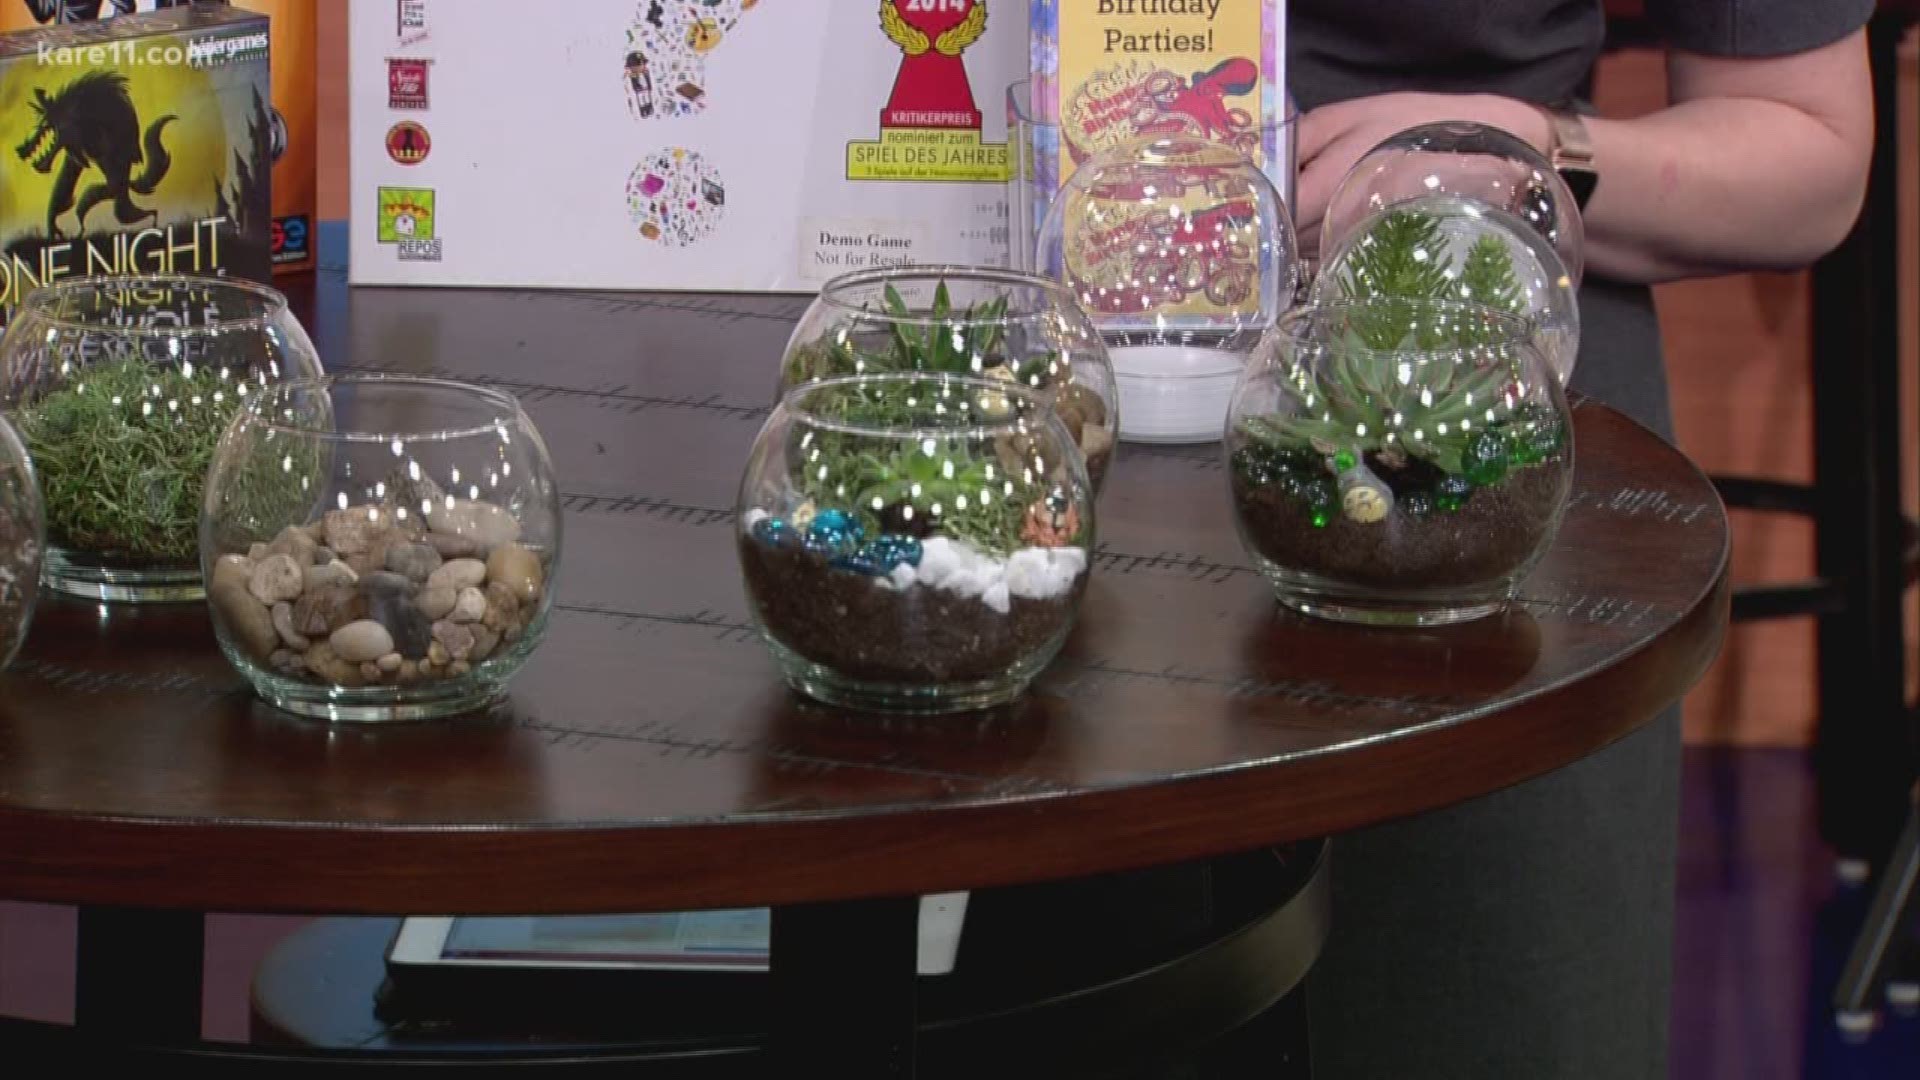 Terrariums are making a comeback and one of the age groups who are digging them are teenagers.